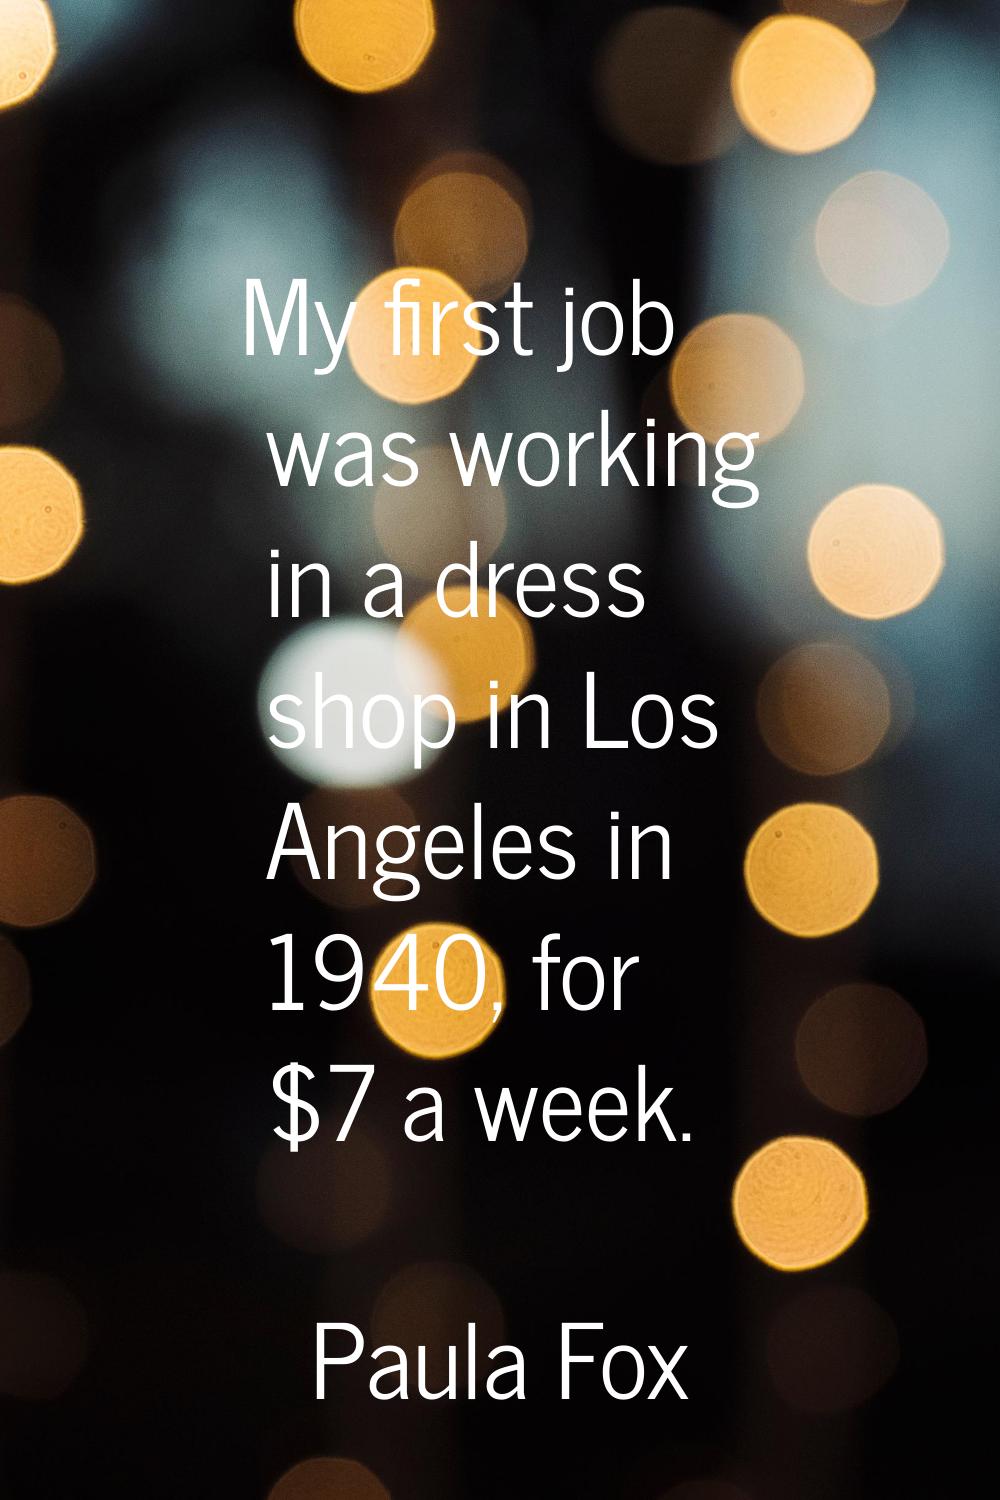 My first job was working in a dress shop in Los Angeles in 1940, for $7 a week.